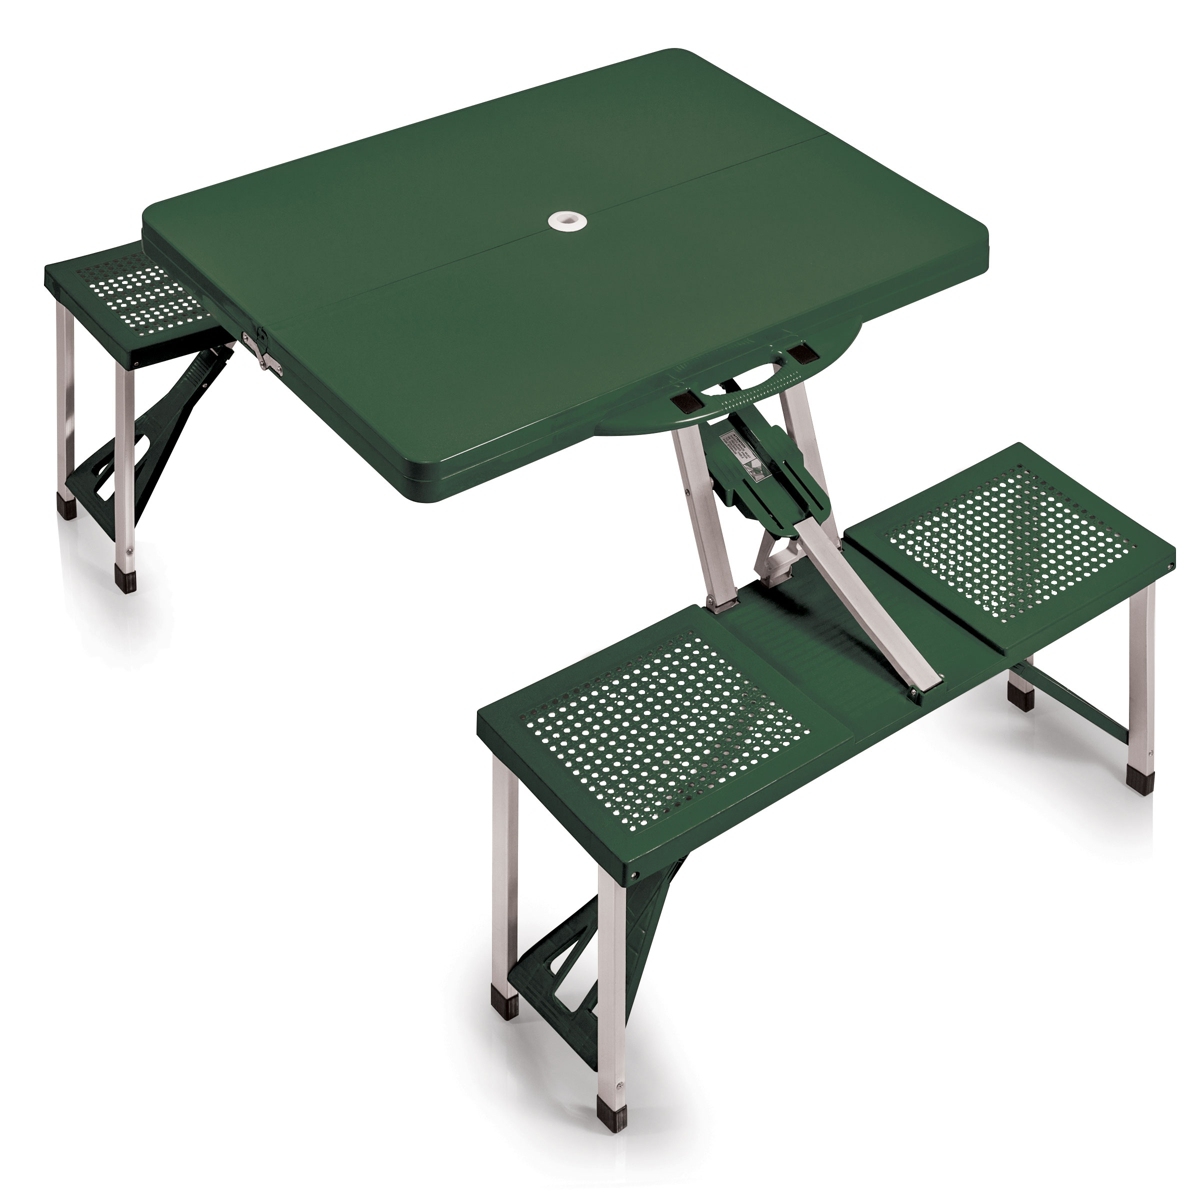 by Picnic Time Picnic Table Portable Folding Table with Seats - Hunter Gre